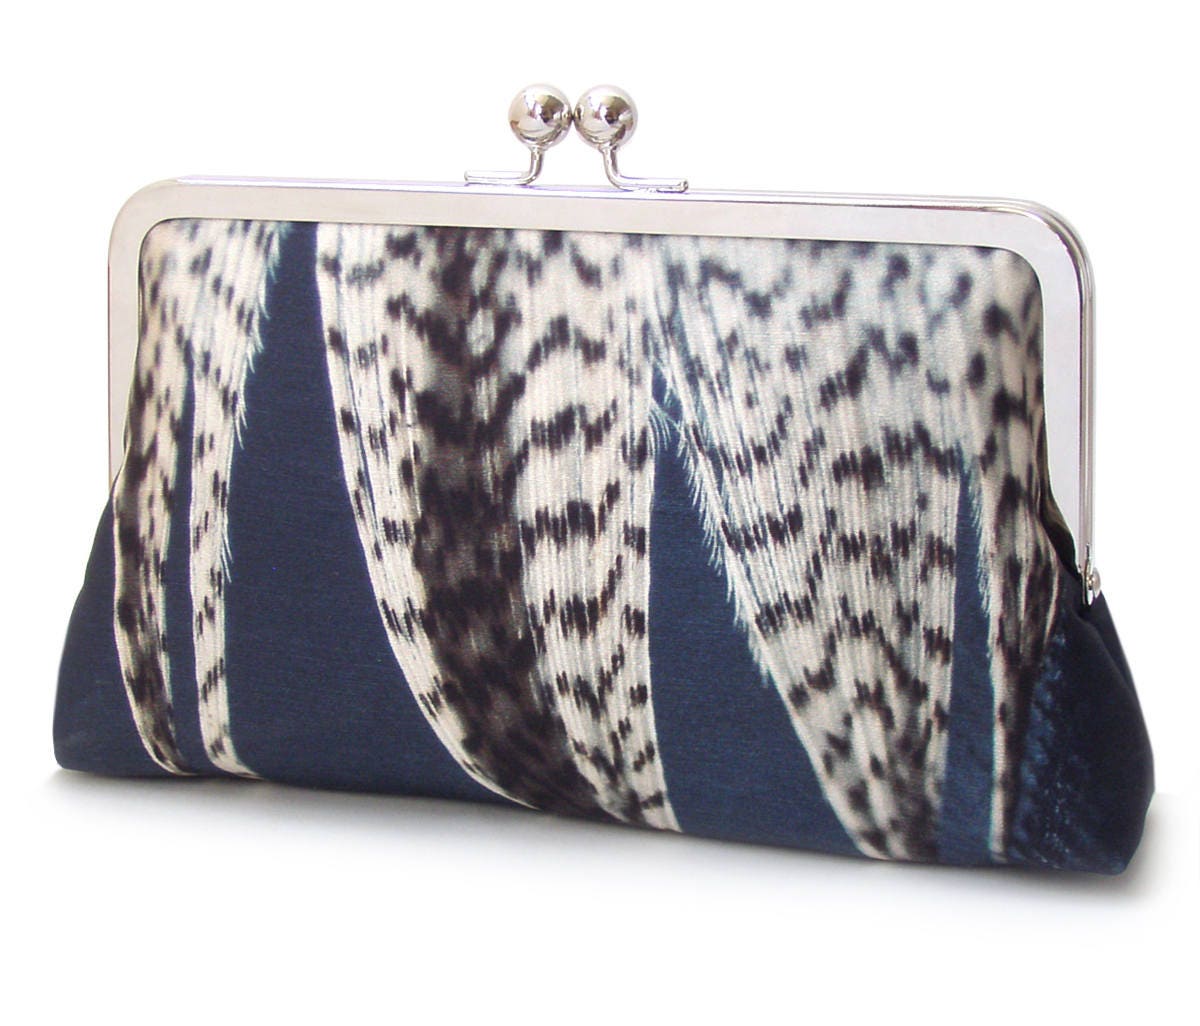 Feather stripe clutch bag navy silk purse with chain handle Etsy